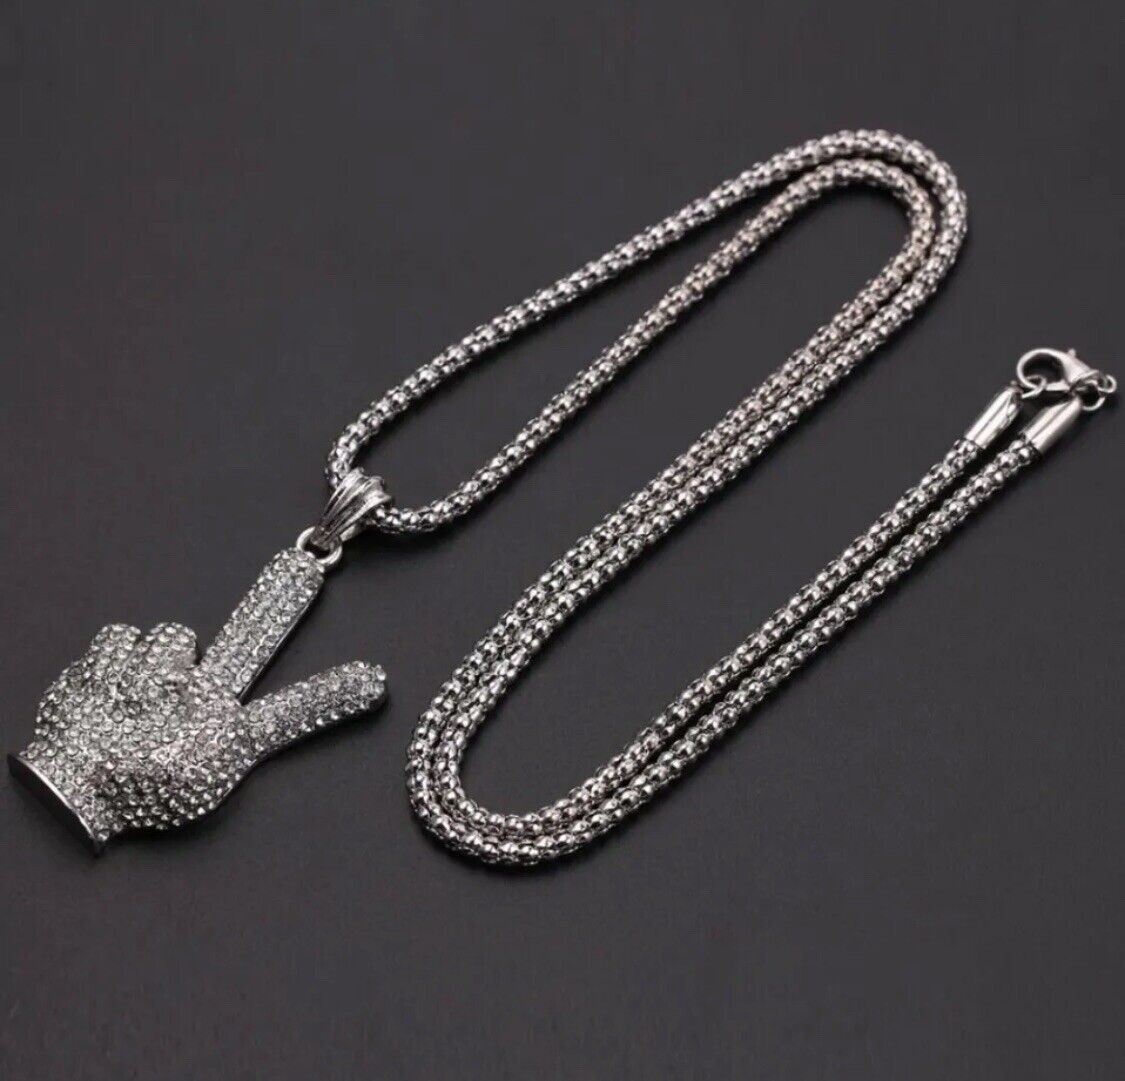 SILVER Iced Out Peace Middle Finger Hip Hop Necklace Jewellery  Chain Pendant